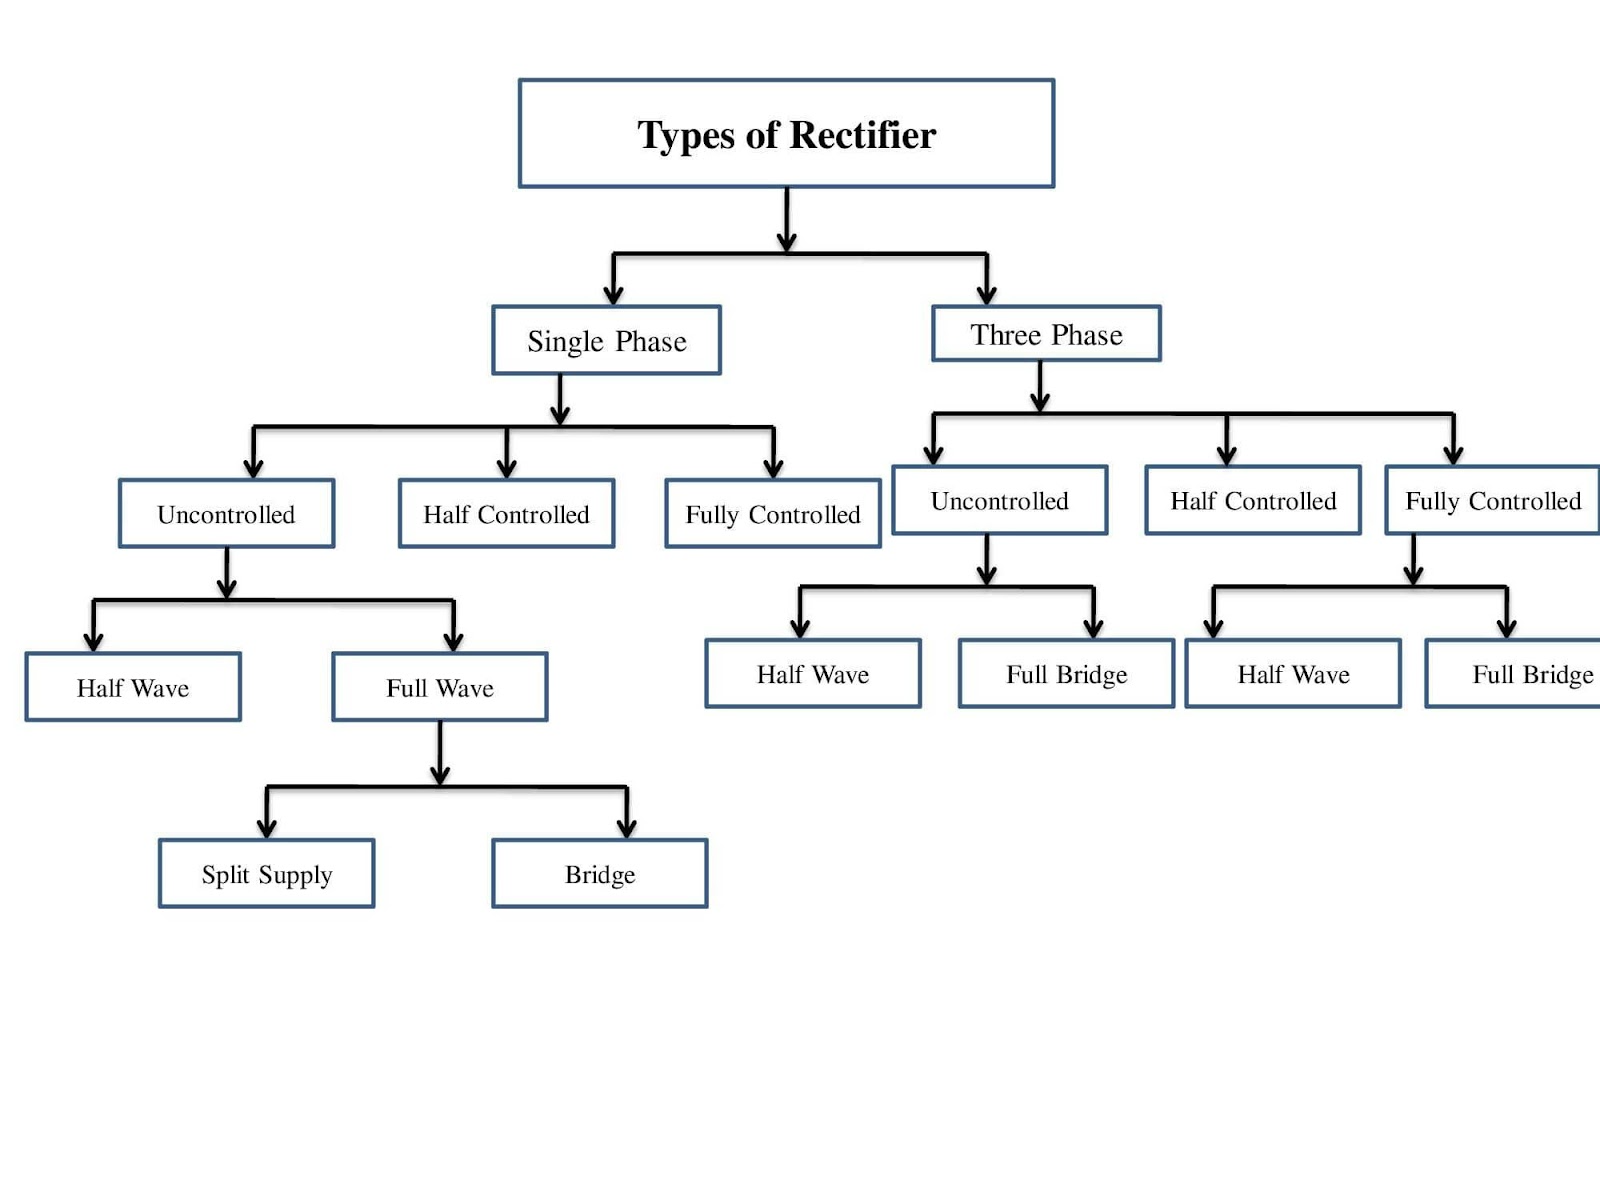 Types/Classification of Rectifier